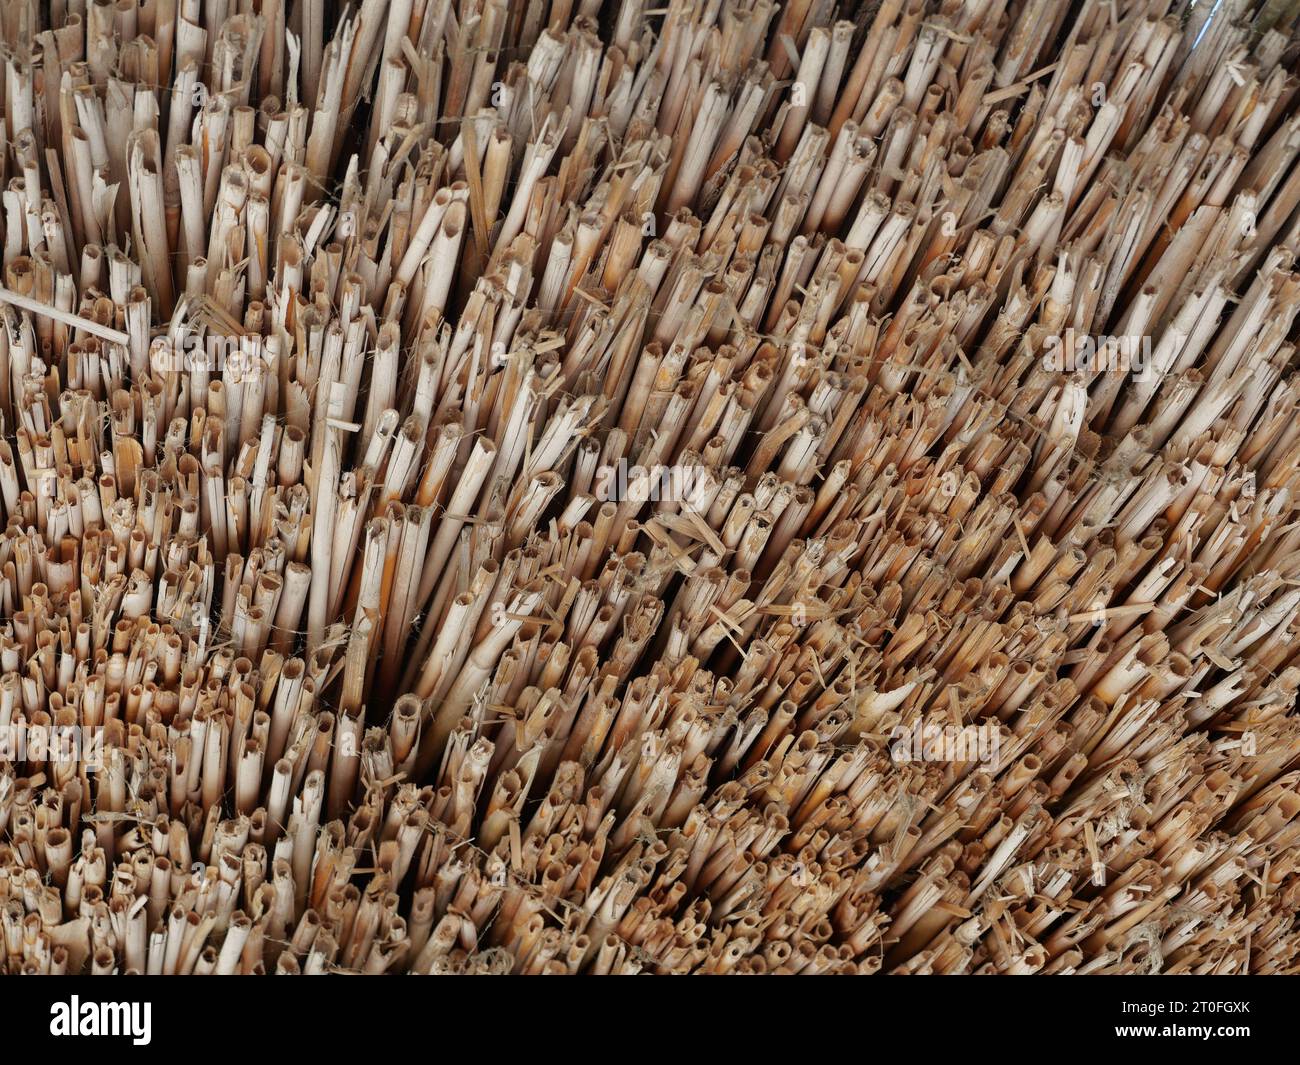 Reed roofs characterize the North German Baltic Sea region. Reed is a natural material and has been used for roofing for thousands of years. Stock Photo